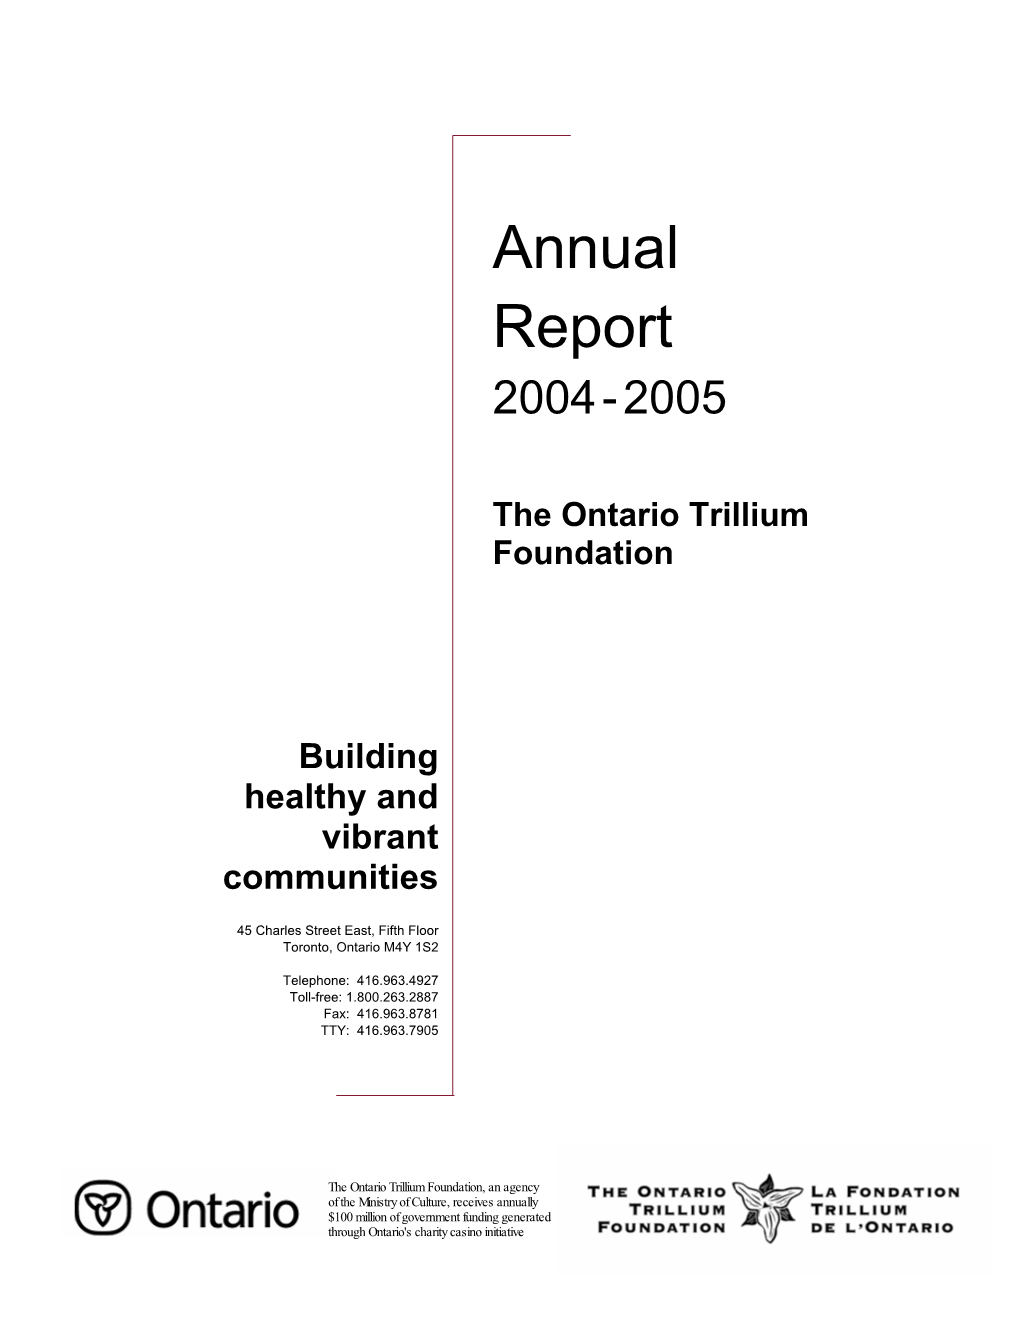 Annual Report for the Fiscal Year 2004-2005